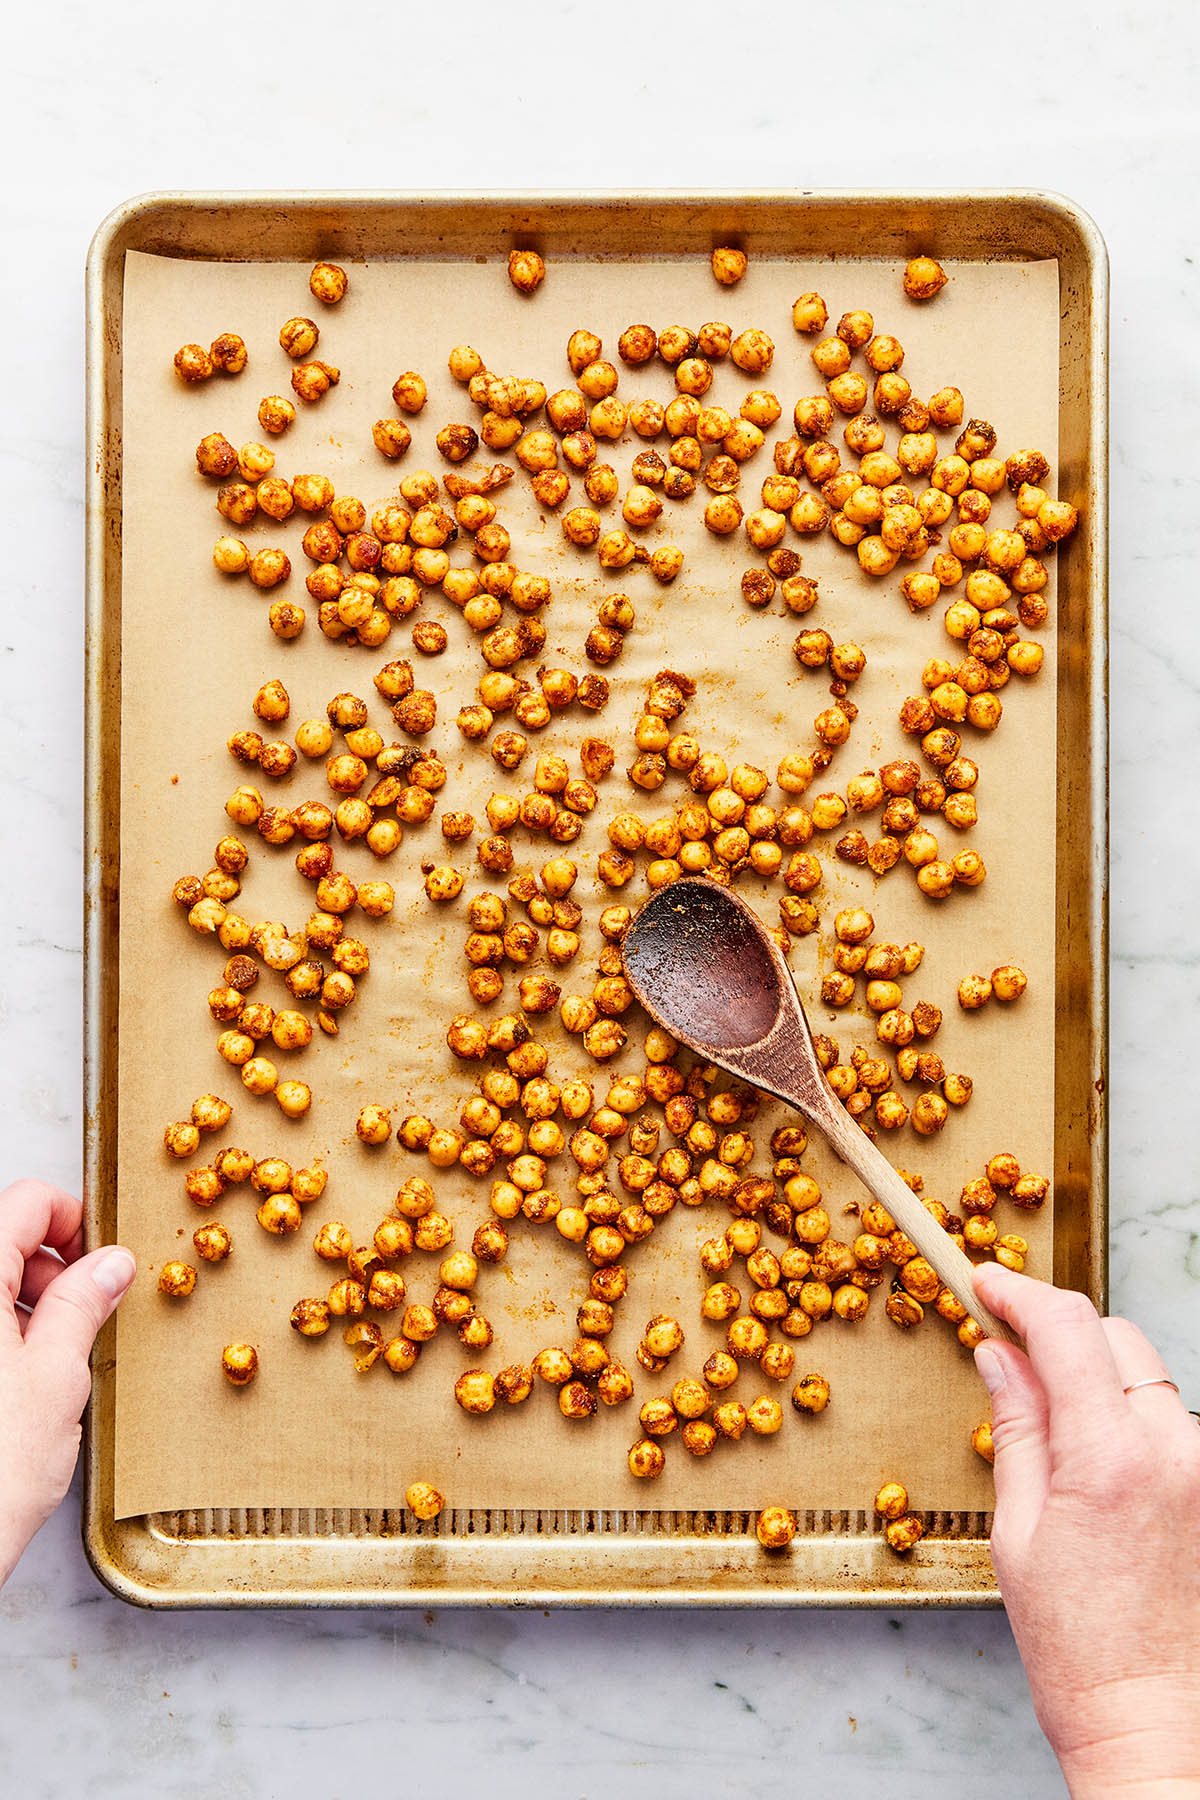 A hand using a wooden spoon to spread uncooked spiced chickpeas evenly on a baking sheet for roasting.